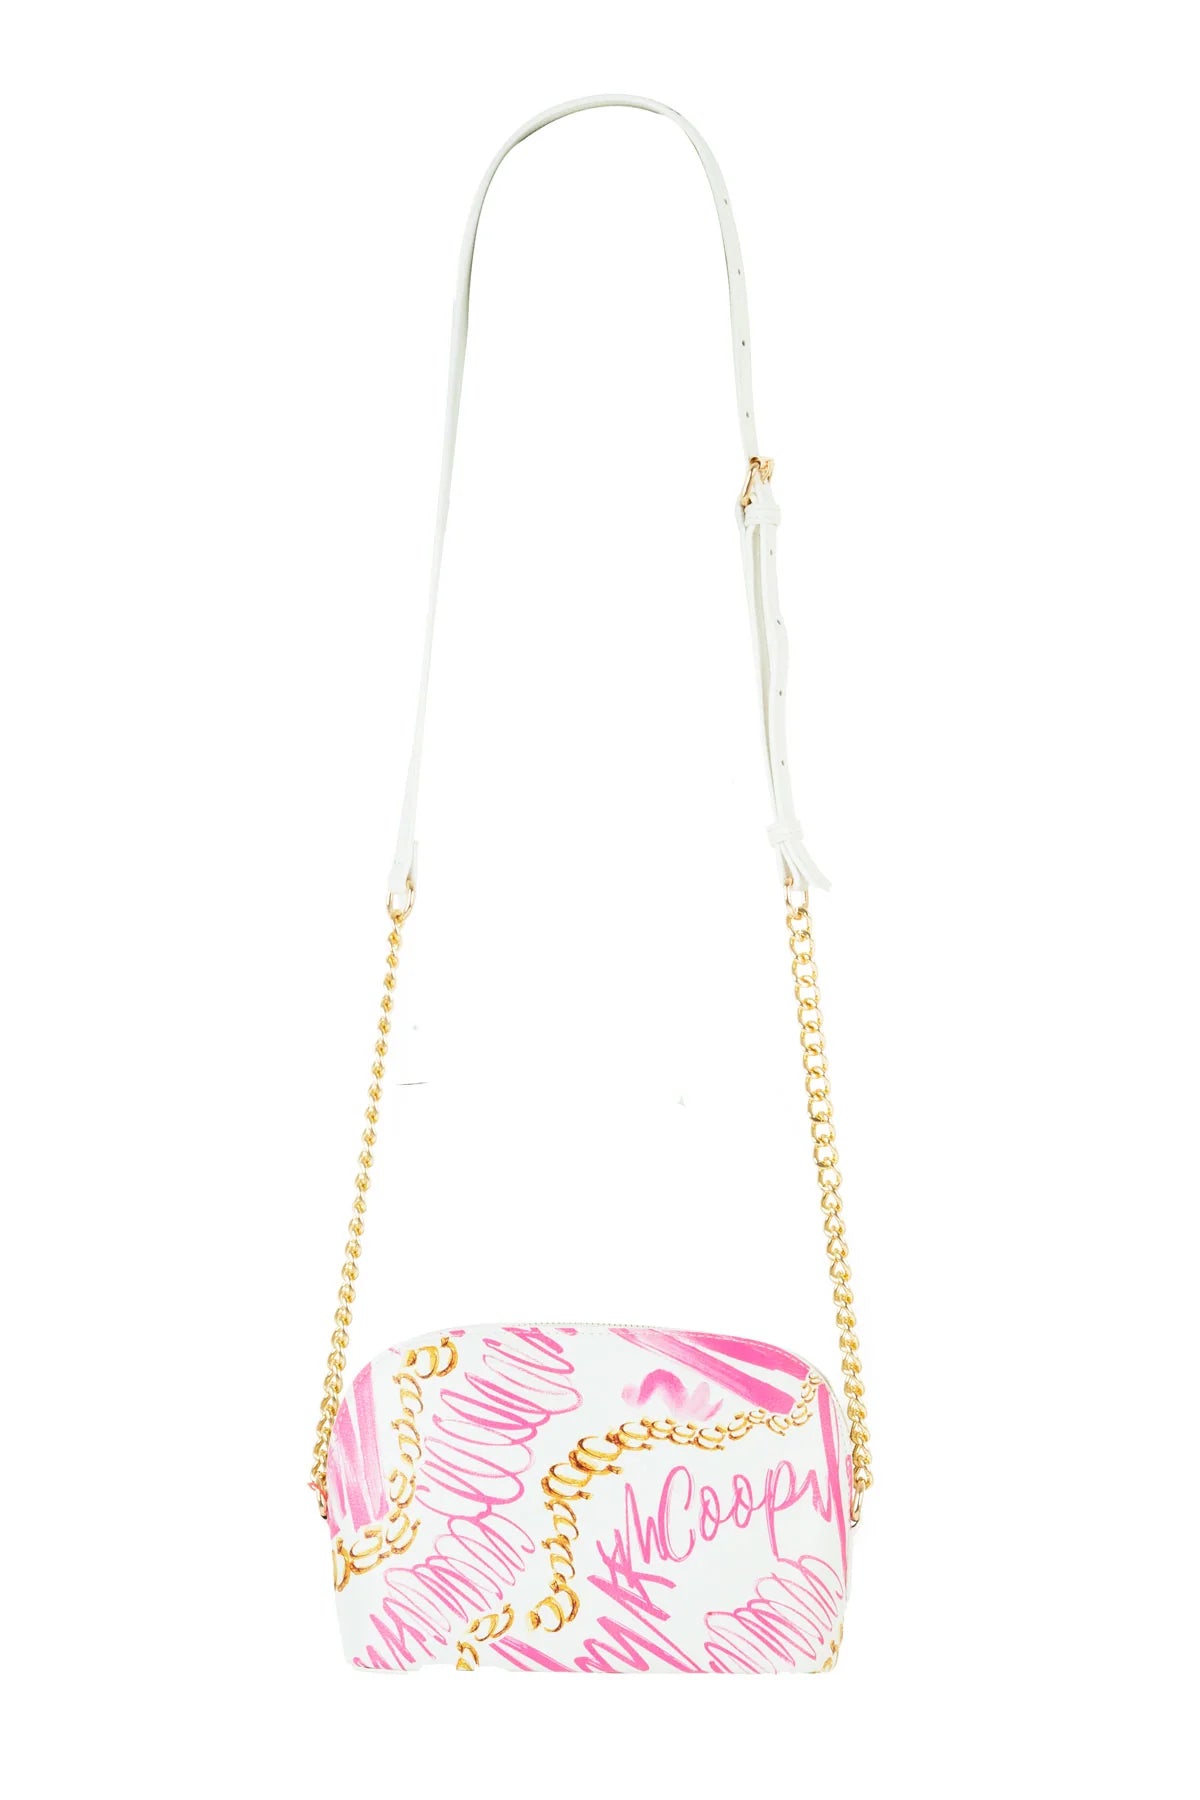 Coop Make Me Up Bag in White/Gold or Pink/Flower or Graffitti